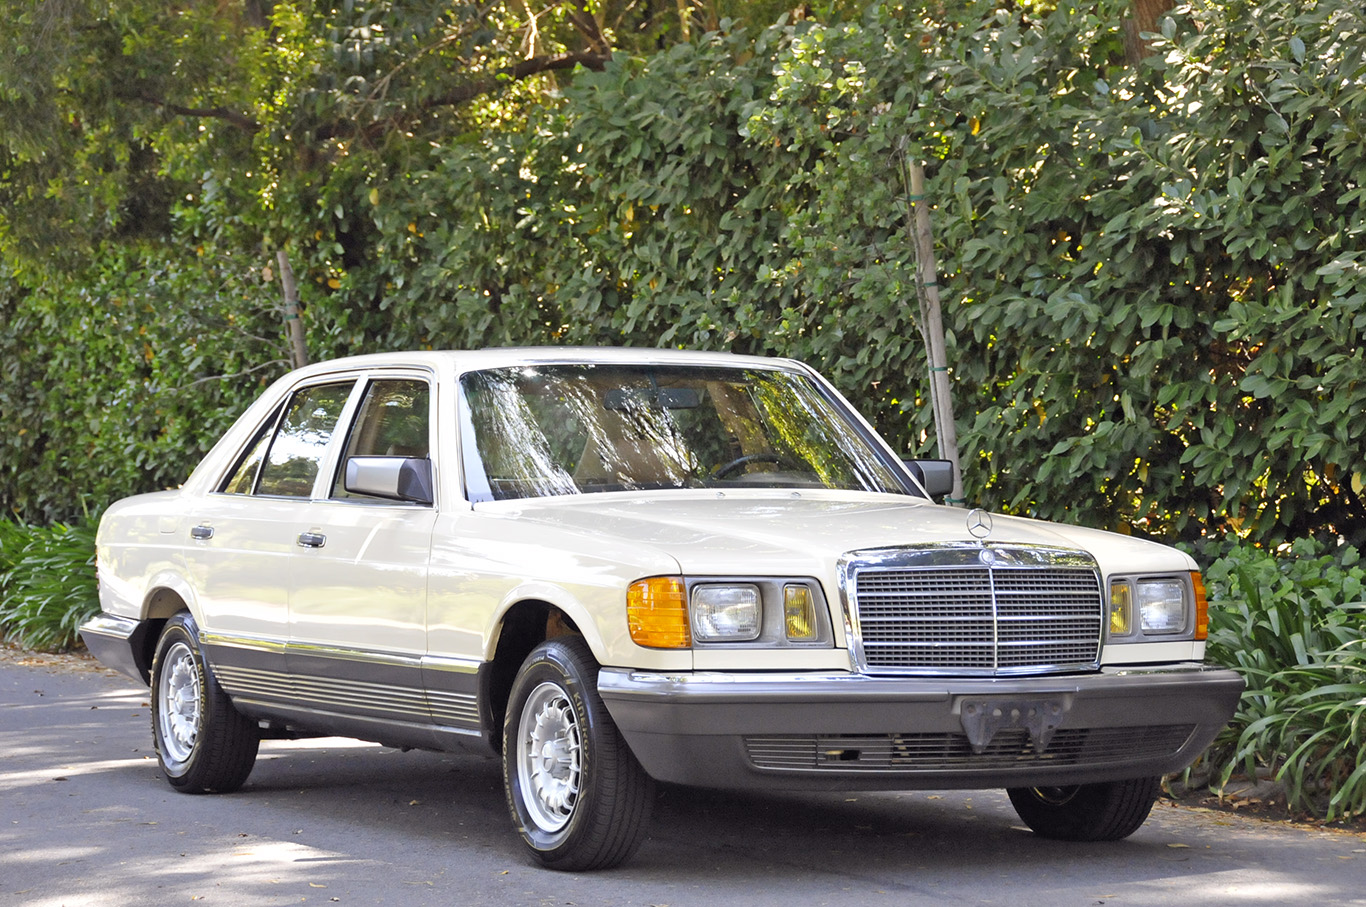 1981 300SD - Ivory/Palomino Leather - 57k miles - Investment Grade